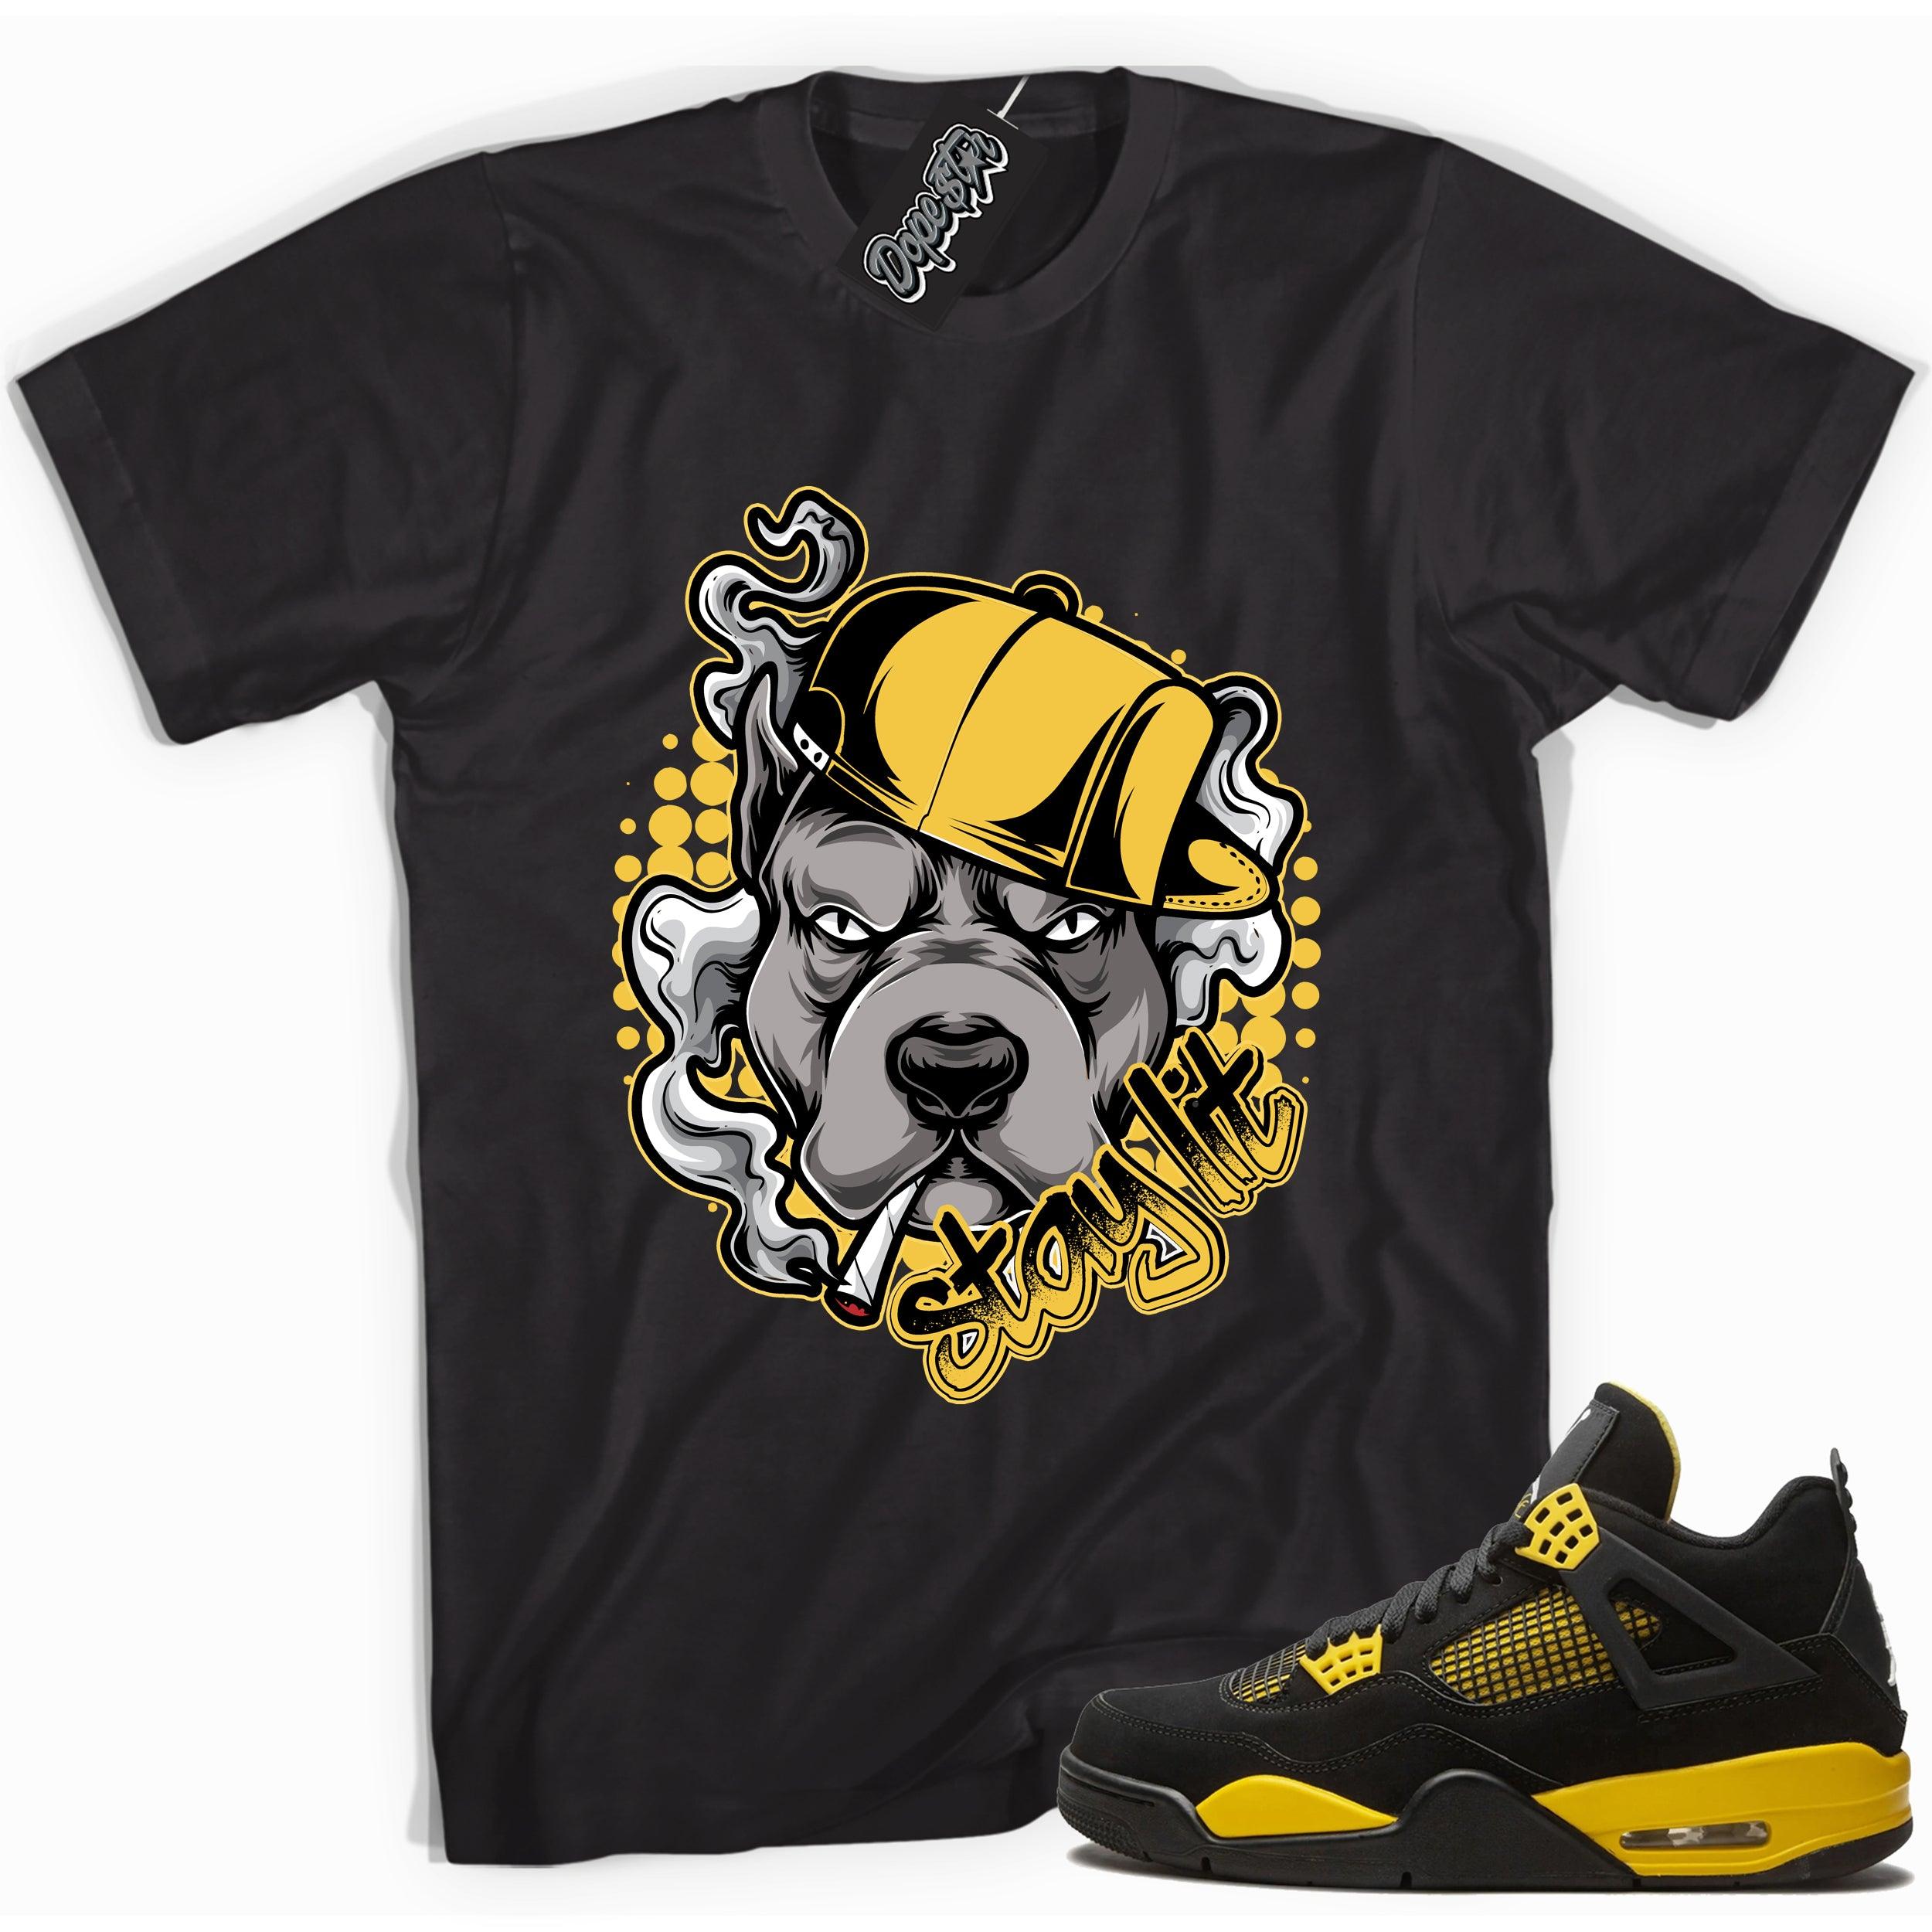 Cool black graphic tee with 'stay lit' print, that perfectly matches  Air Jordan 4 Thunder sneakers